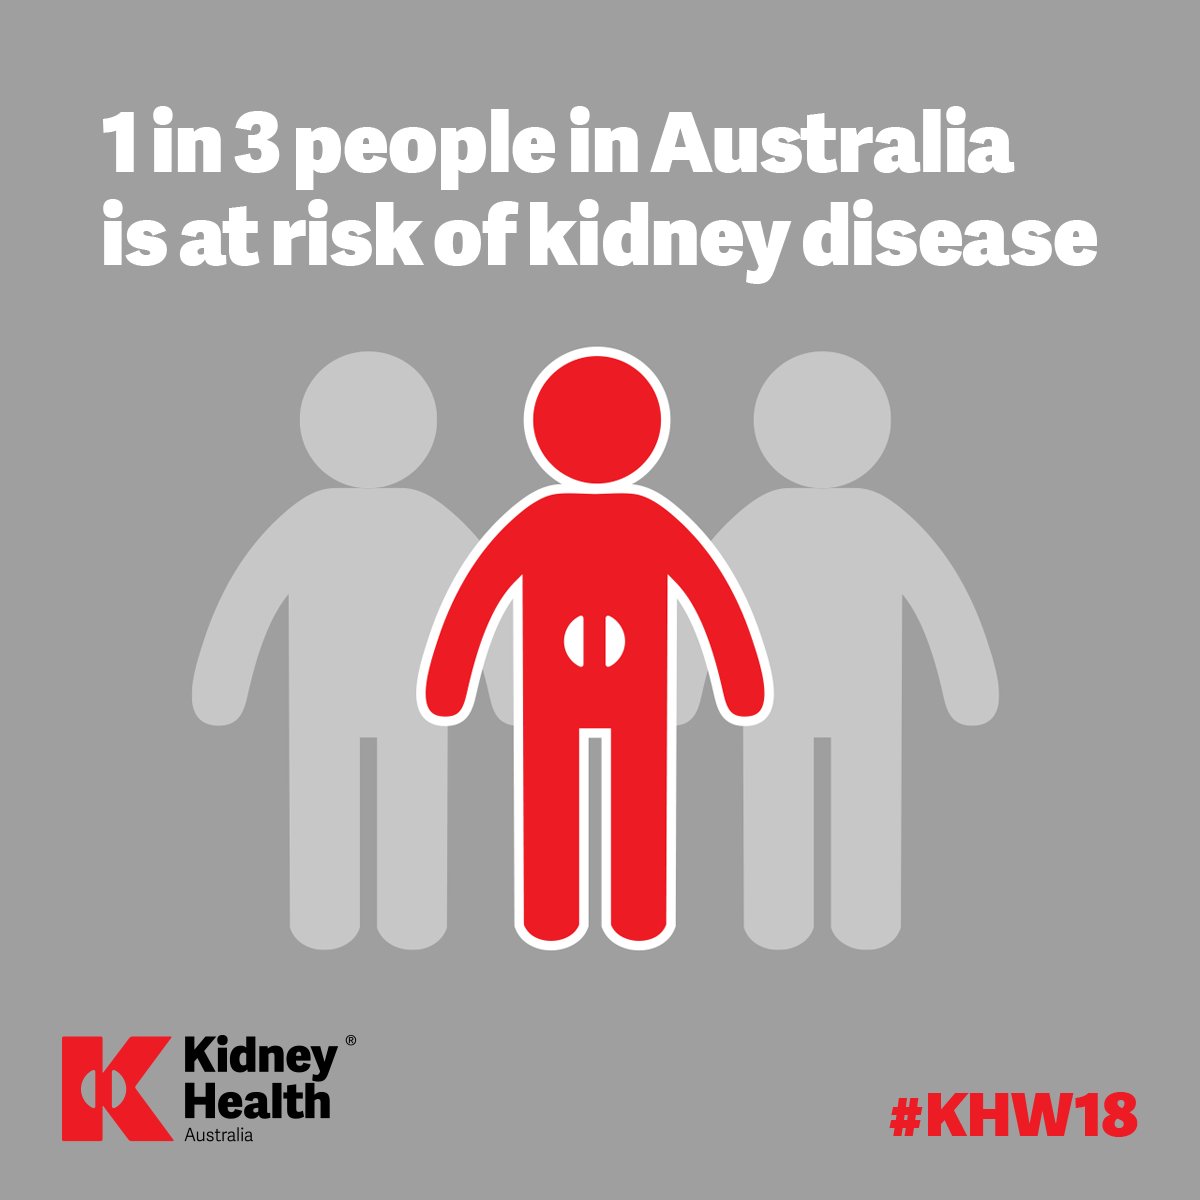 It’s #WorldKidneyDay and @KidneyHealth is urging you to find out if you’re the 1 in 3 at risk of kidney disease. Take the test goo.gl/7TZgw3 #KHW18 #KidneyRiskTest